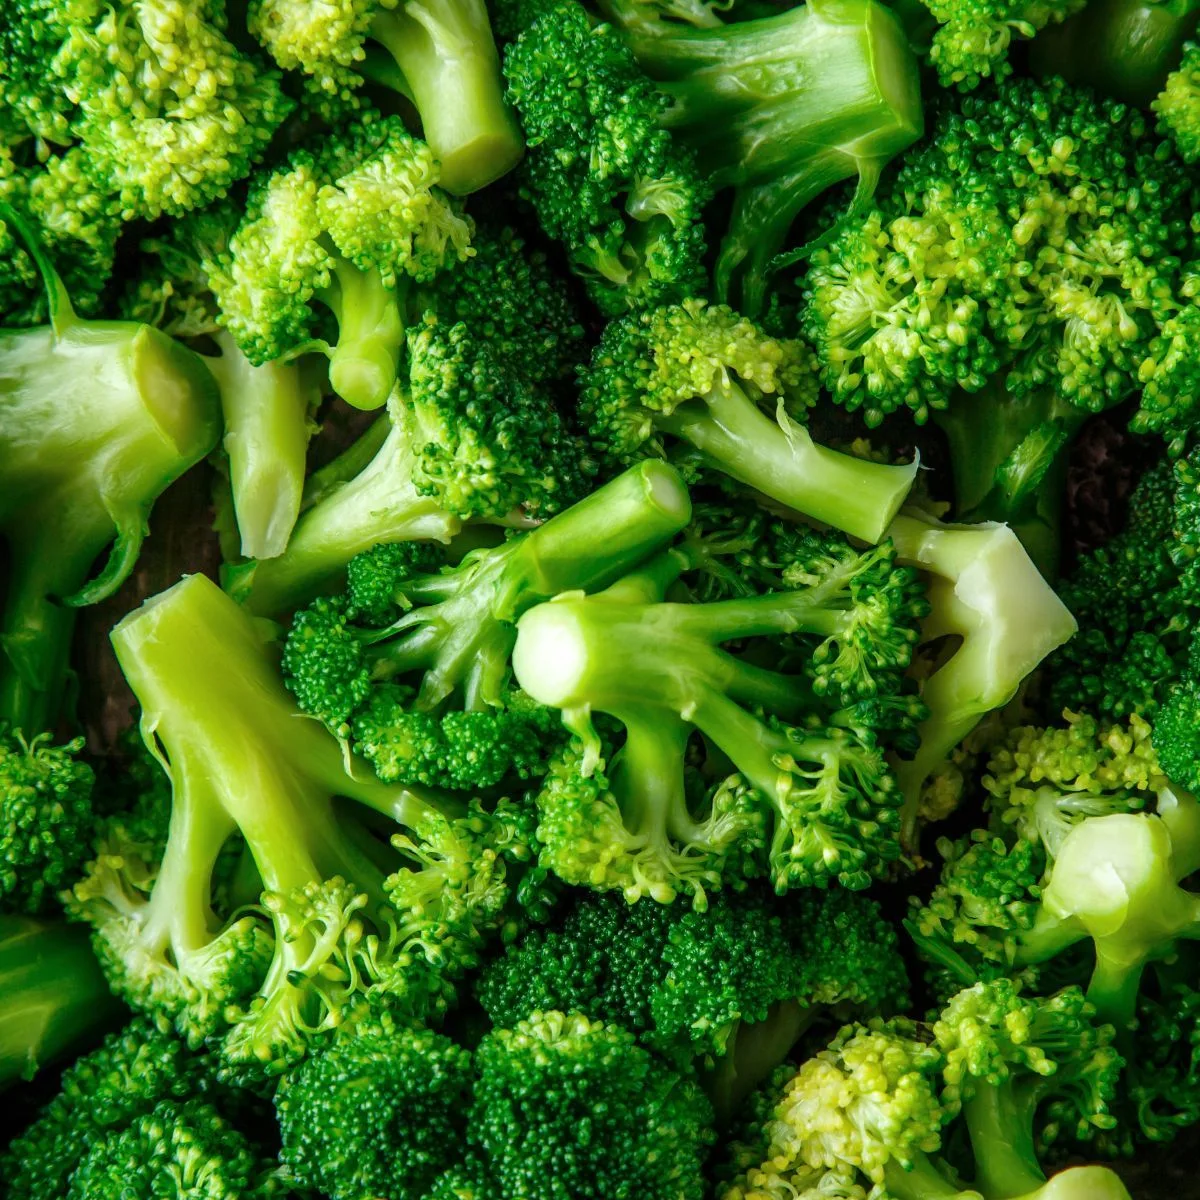 spiritual meaning of colon cancer foods broccoli